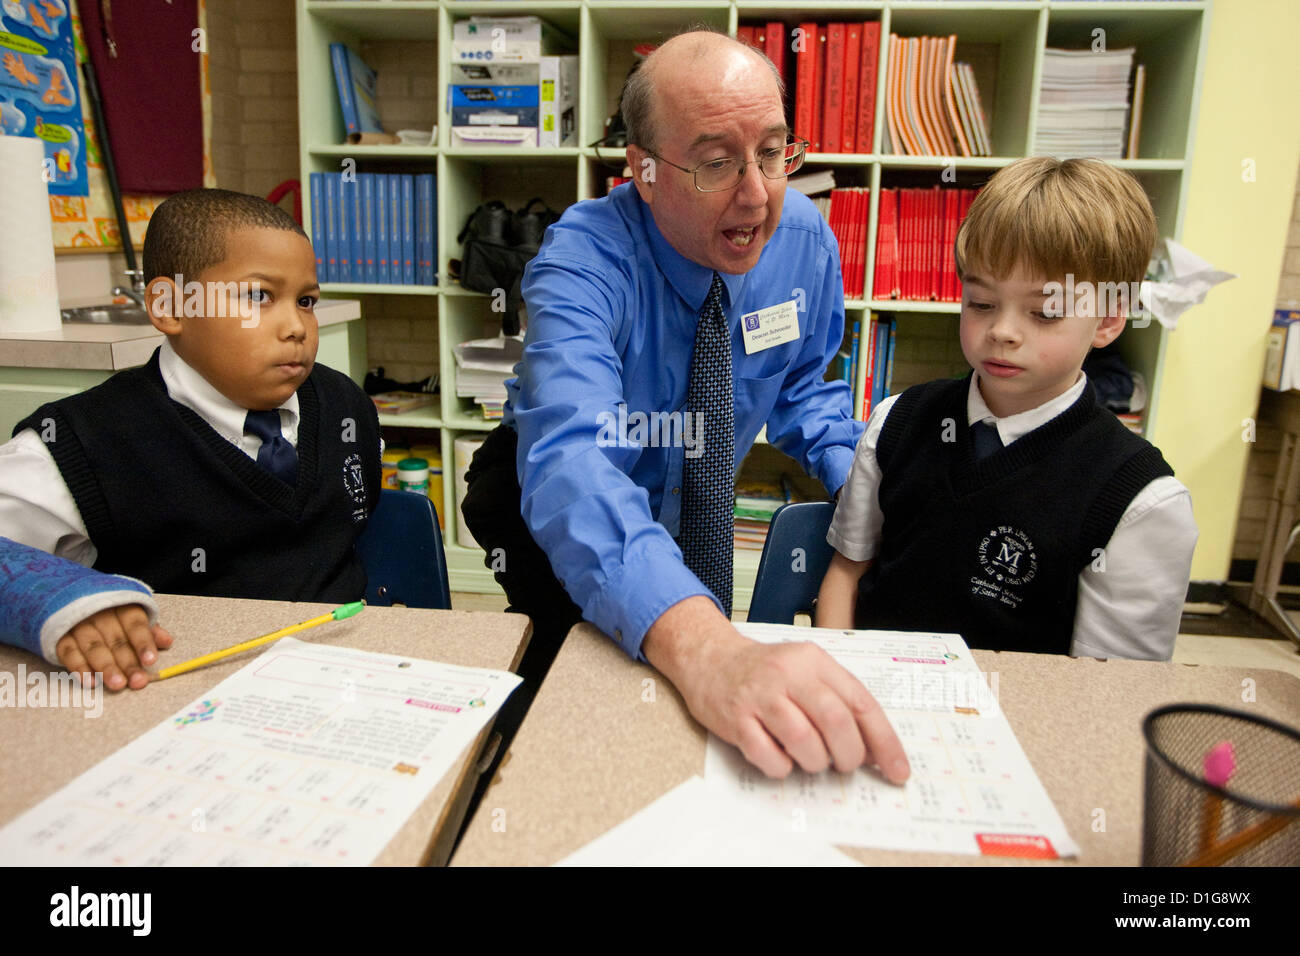 White male teacher assists African-American and Anglo students wearing uniform at private Catholic elementary school in Texas Stock Photo